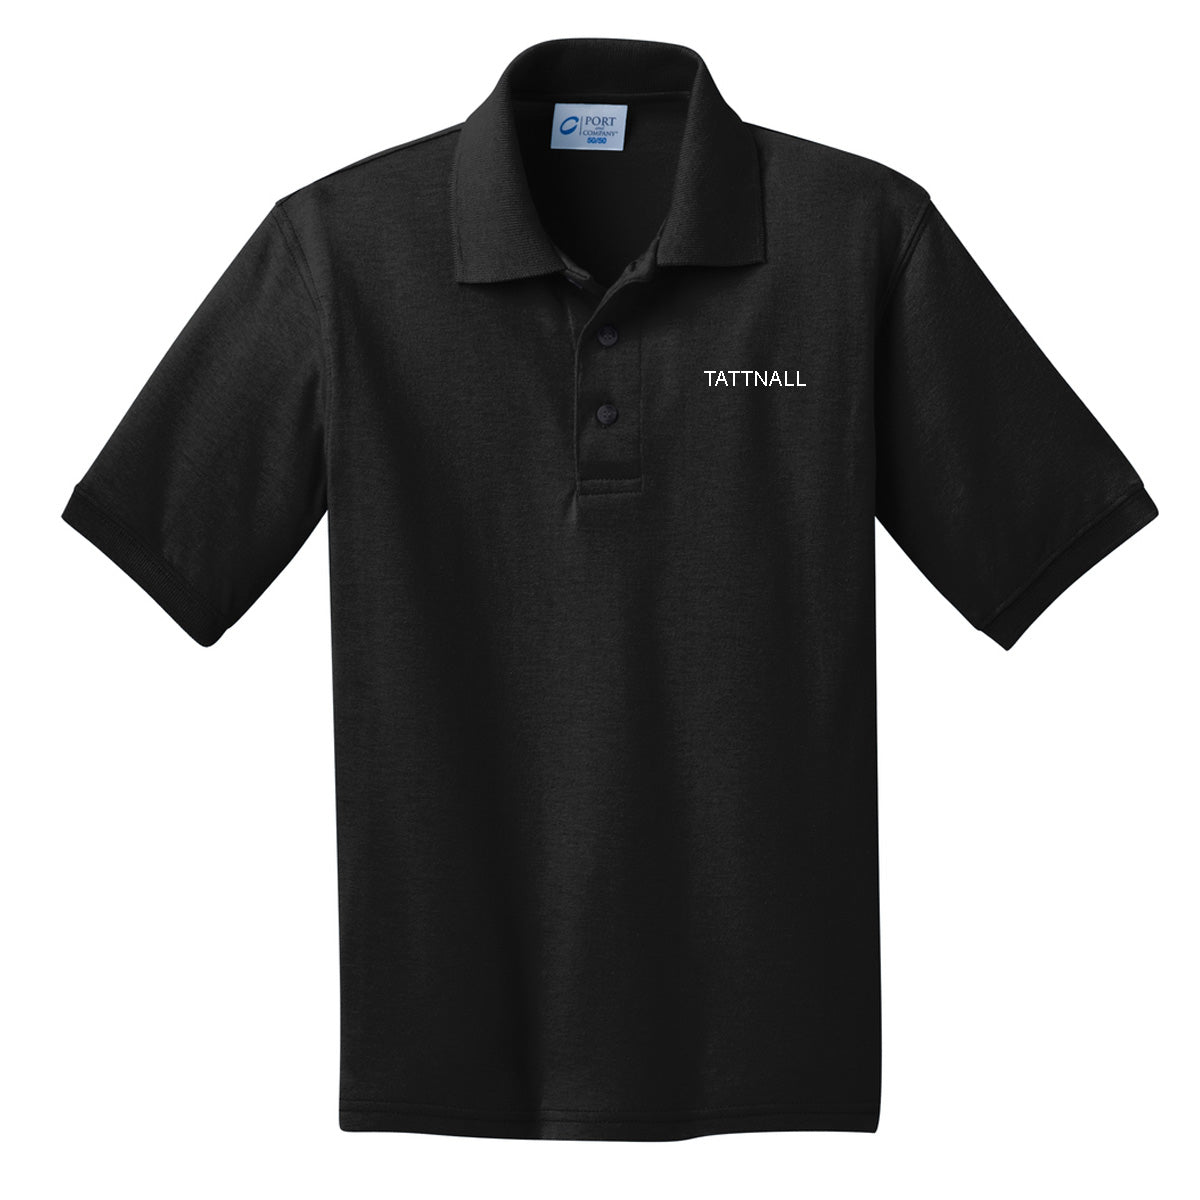 Tattnall - Toddler/Youth Polo with Tattnall - Black (KP55Y) - Southern Grace Creations